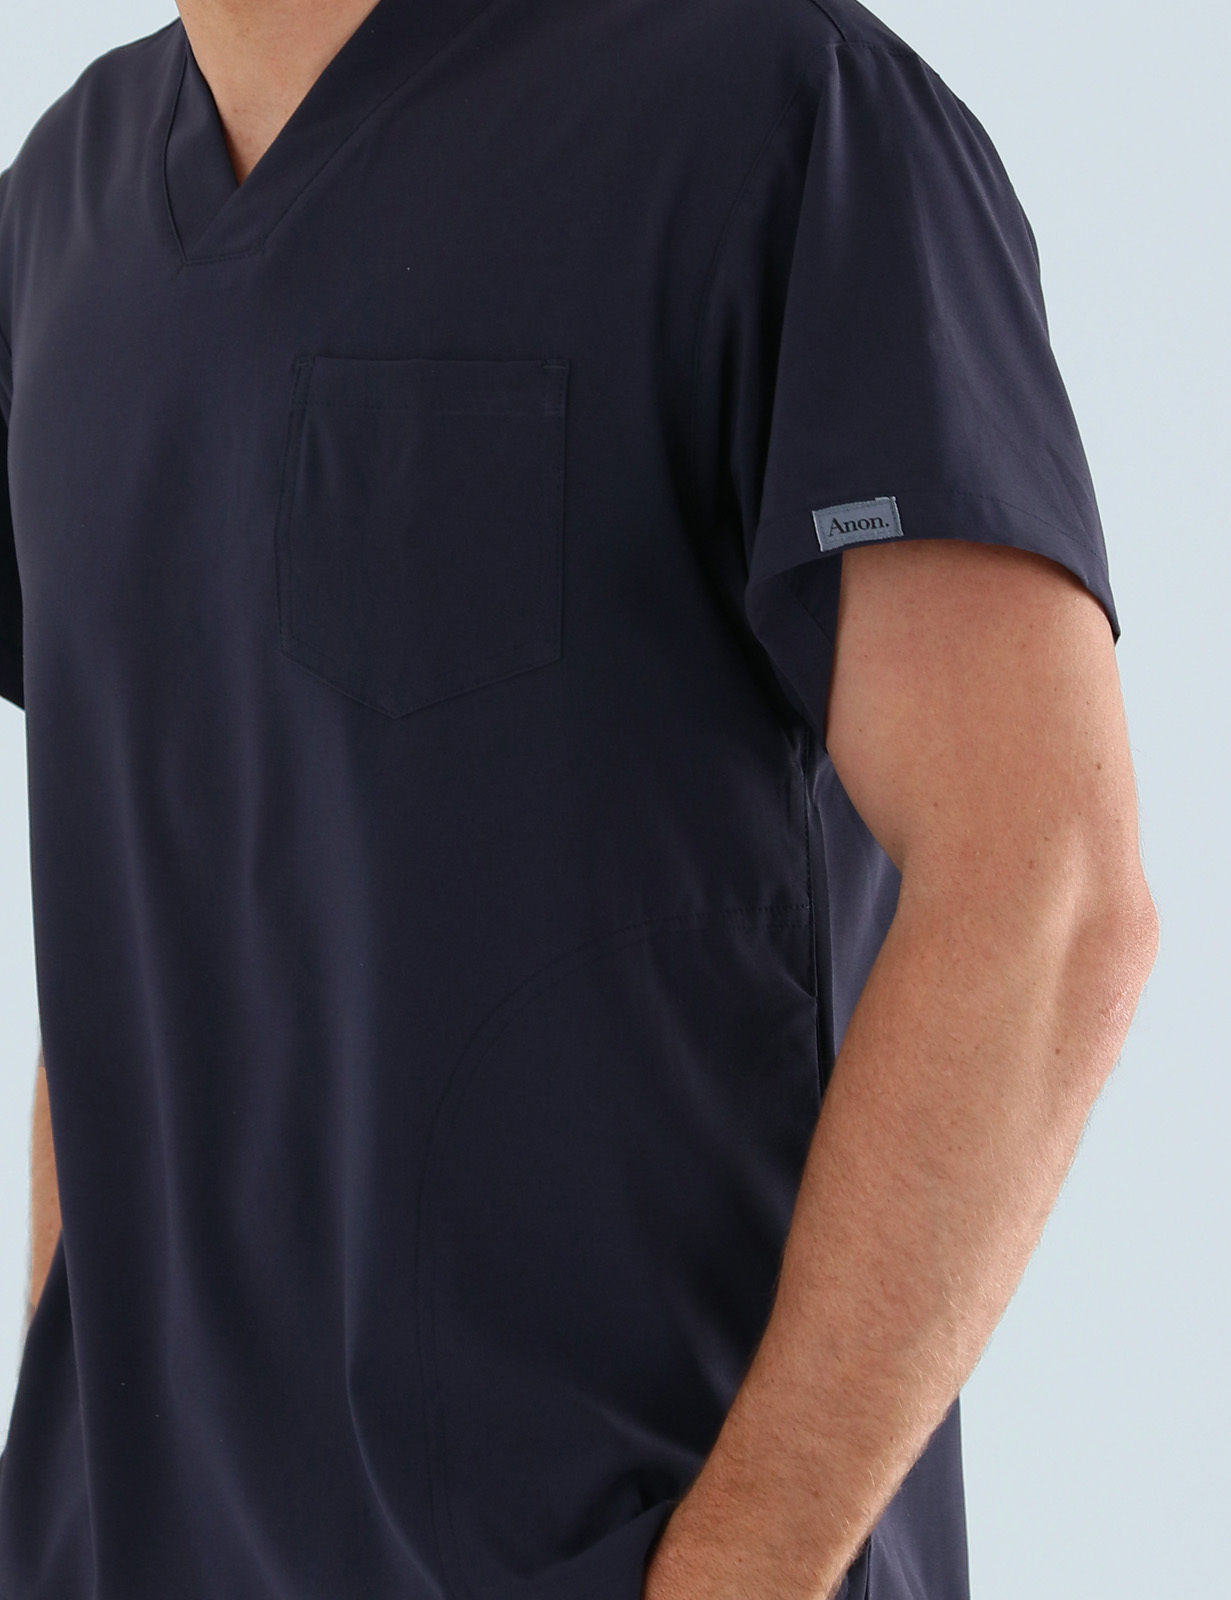 Anon Men's Scrub Top (Stealth Collection) Poly/Spandex - Charcoal Navy